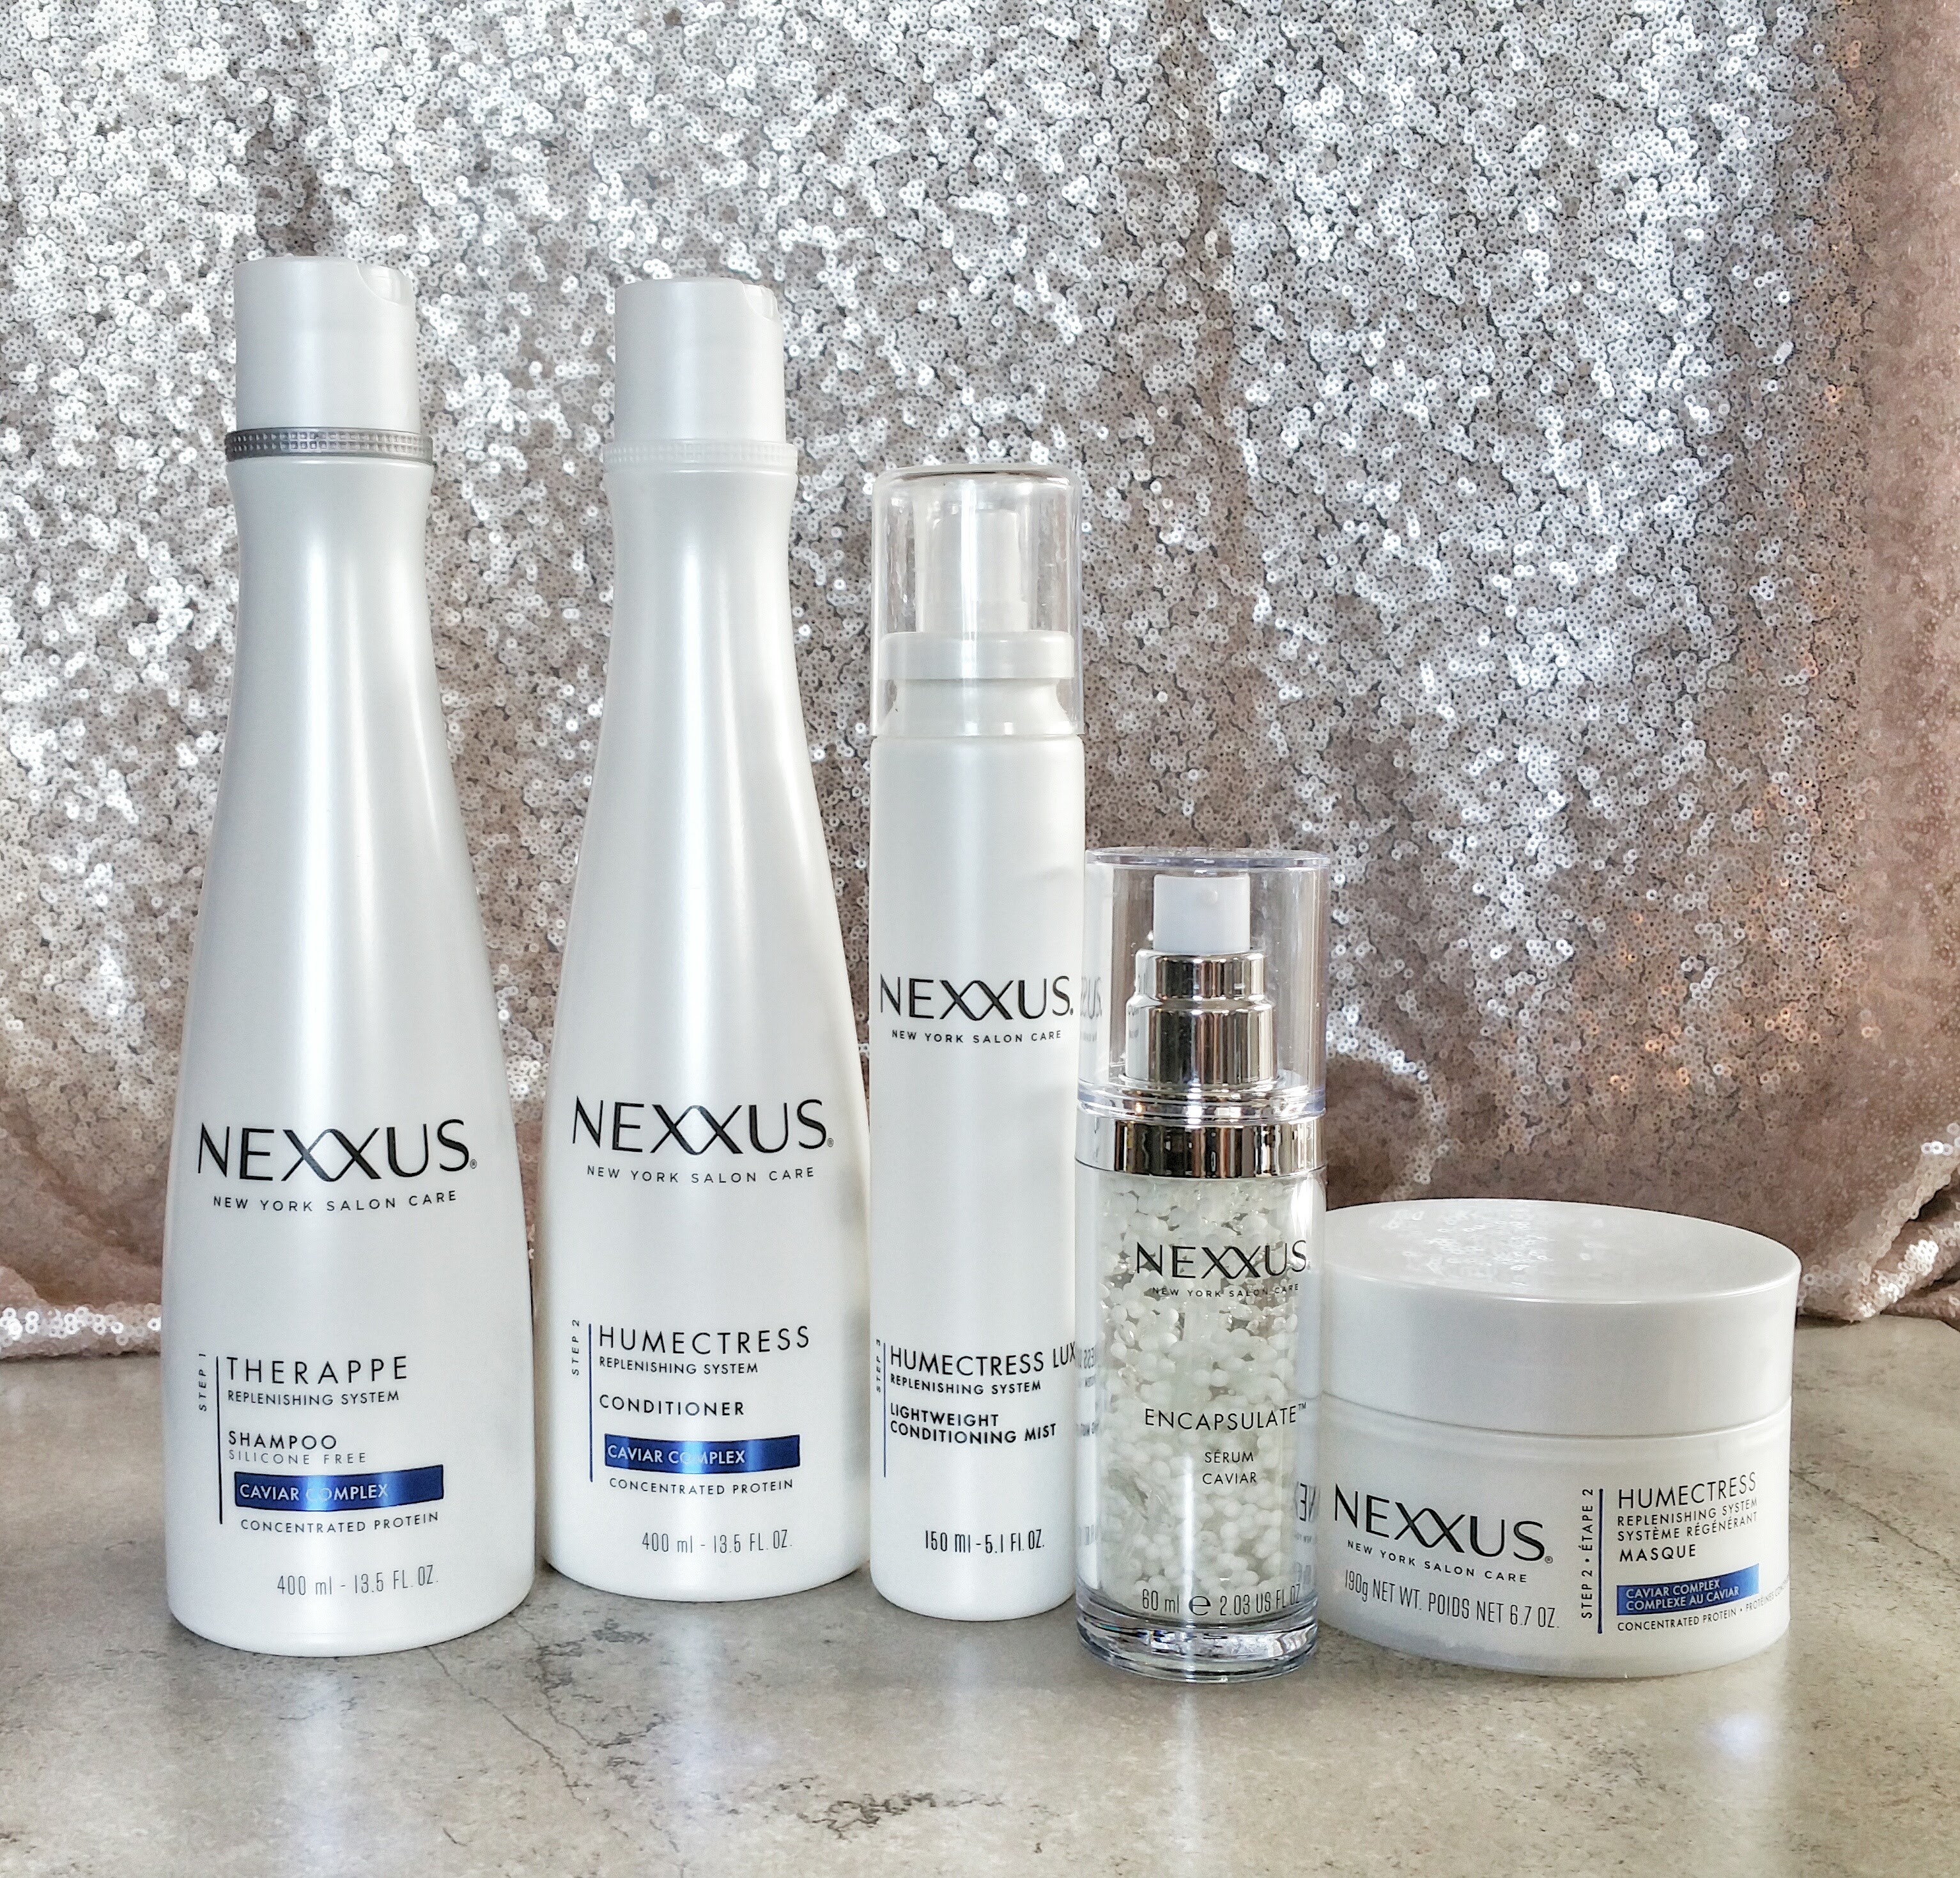 Taming My Hair Beast This Summer With Nexxus New York Salon Care